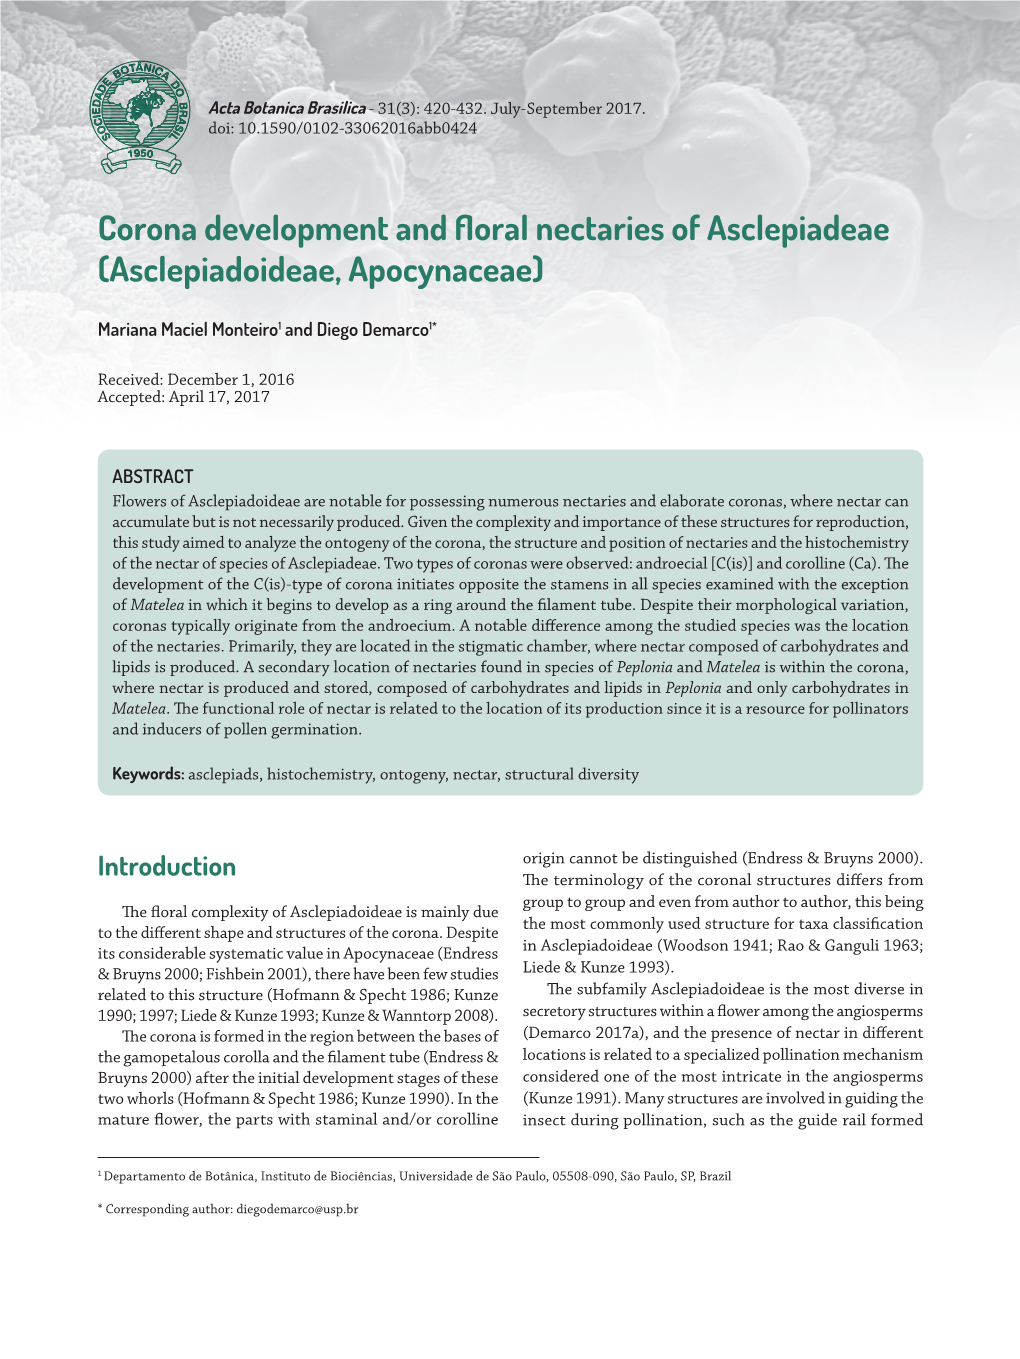 Corona Development and Floral Nectaries of Asclepiadeae (Asclepiadoideae, Apocynaceae)